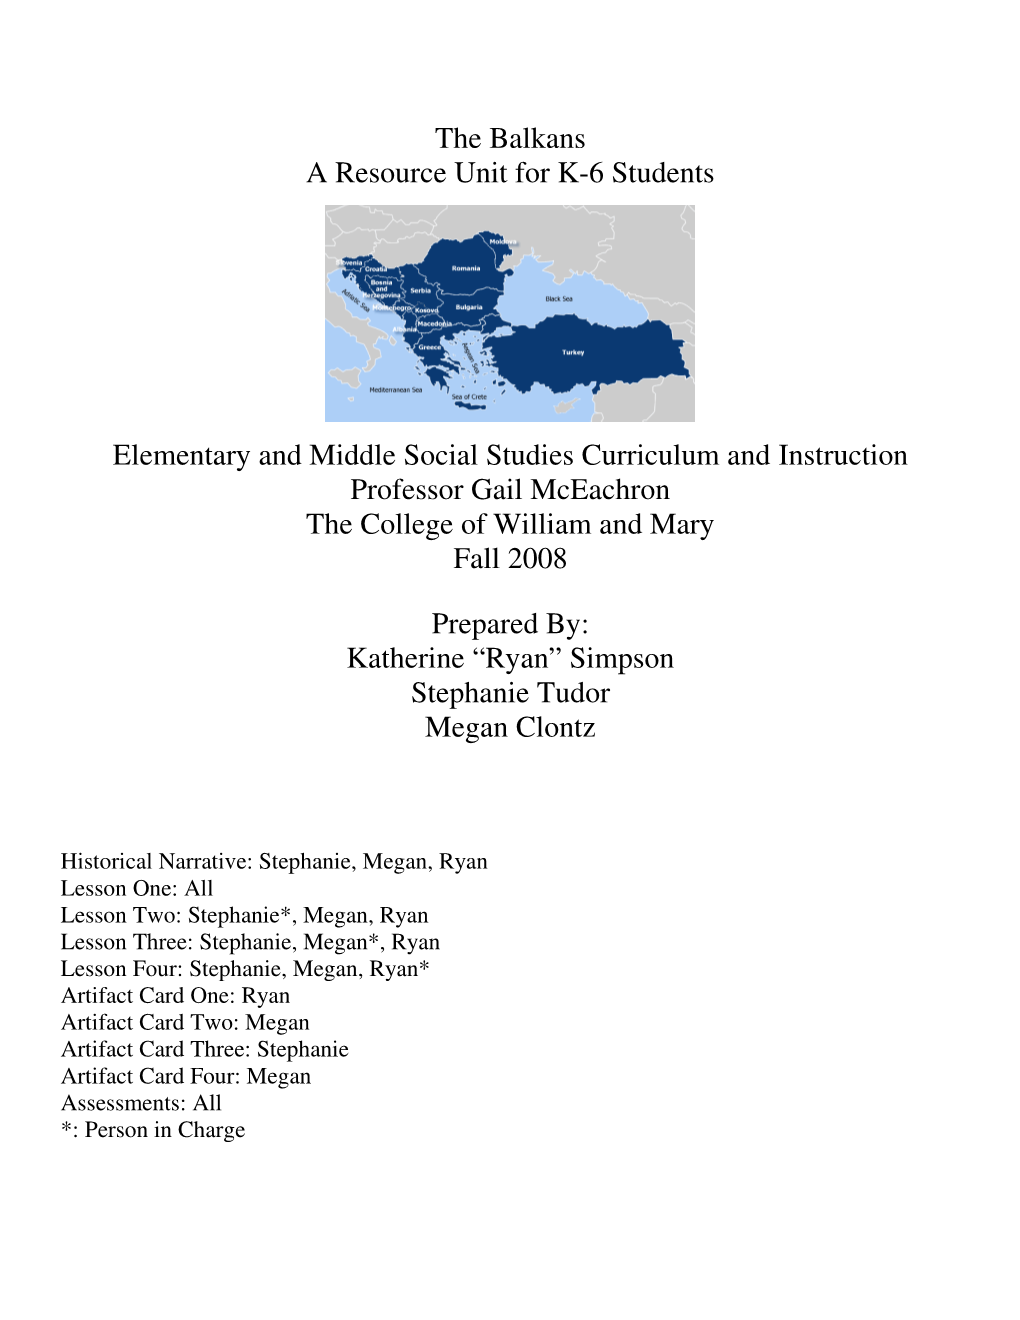 The Balkans a Resource Unit for K-6 Students Elementary and Middle